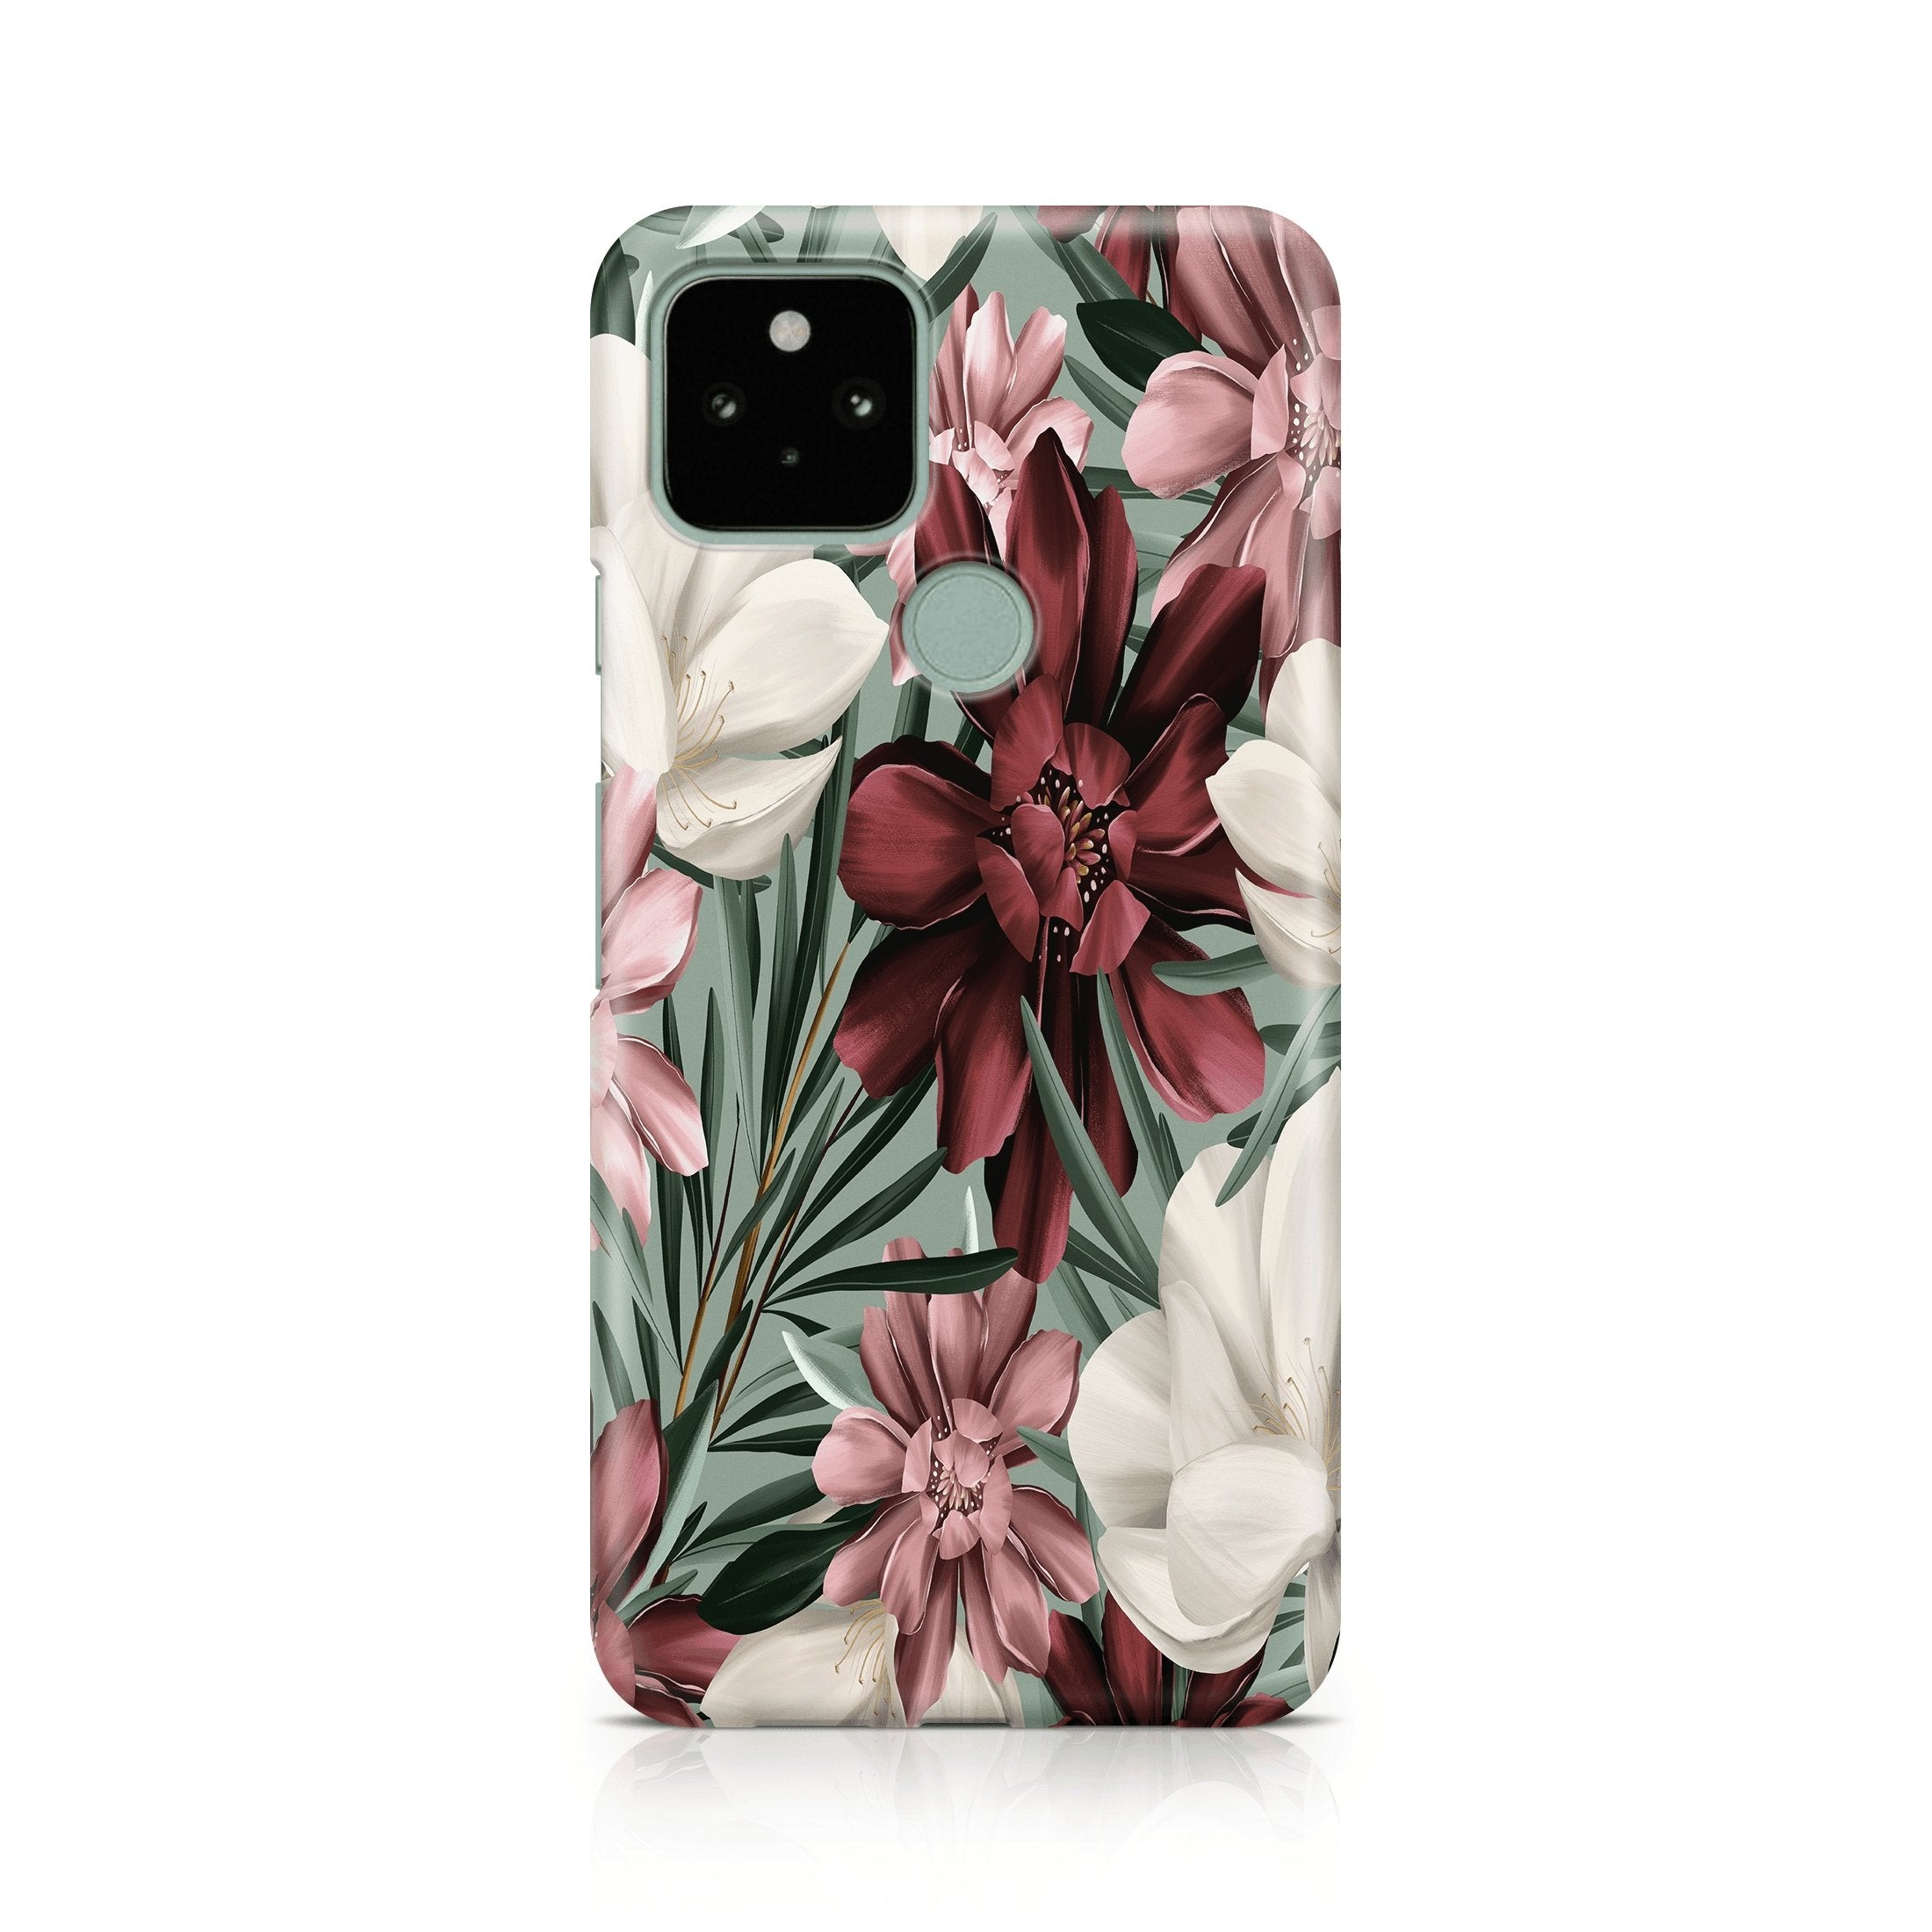 Red & Pink Floral - Google phone case designs by CaseSwagger